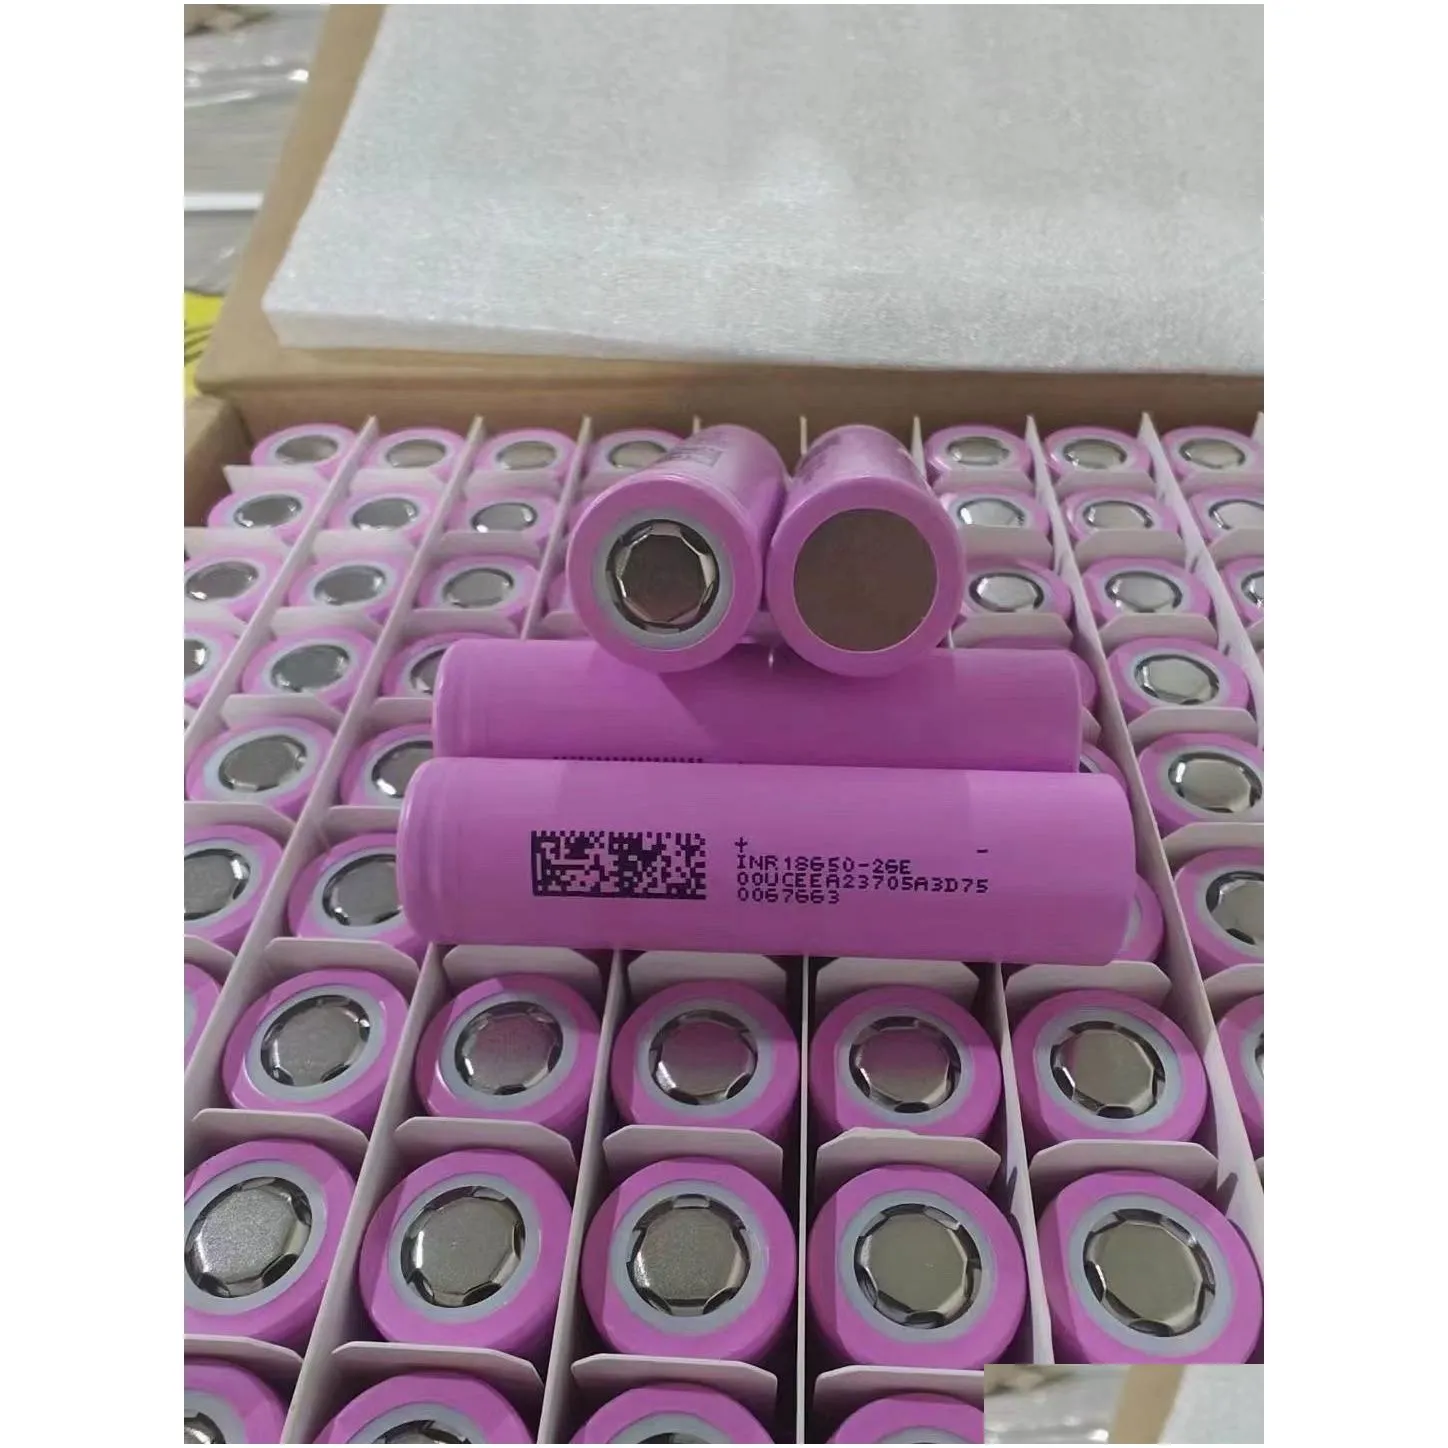 high quality 30q 3000mah 18650 rechargeable battery - 20a max high drain discharge delivery with netherlands 7k 9k 12k box agf